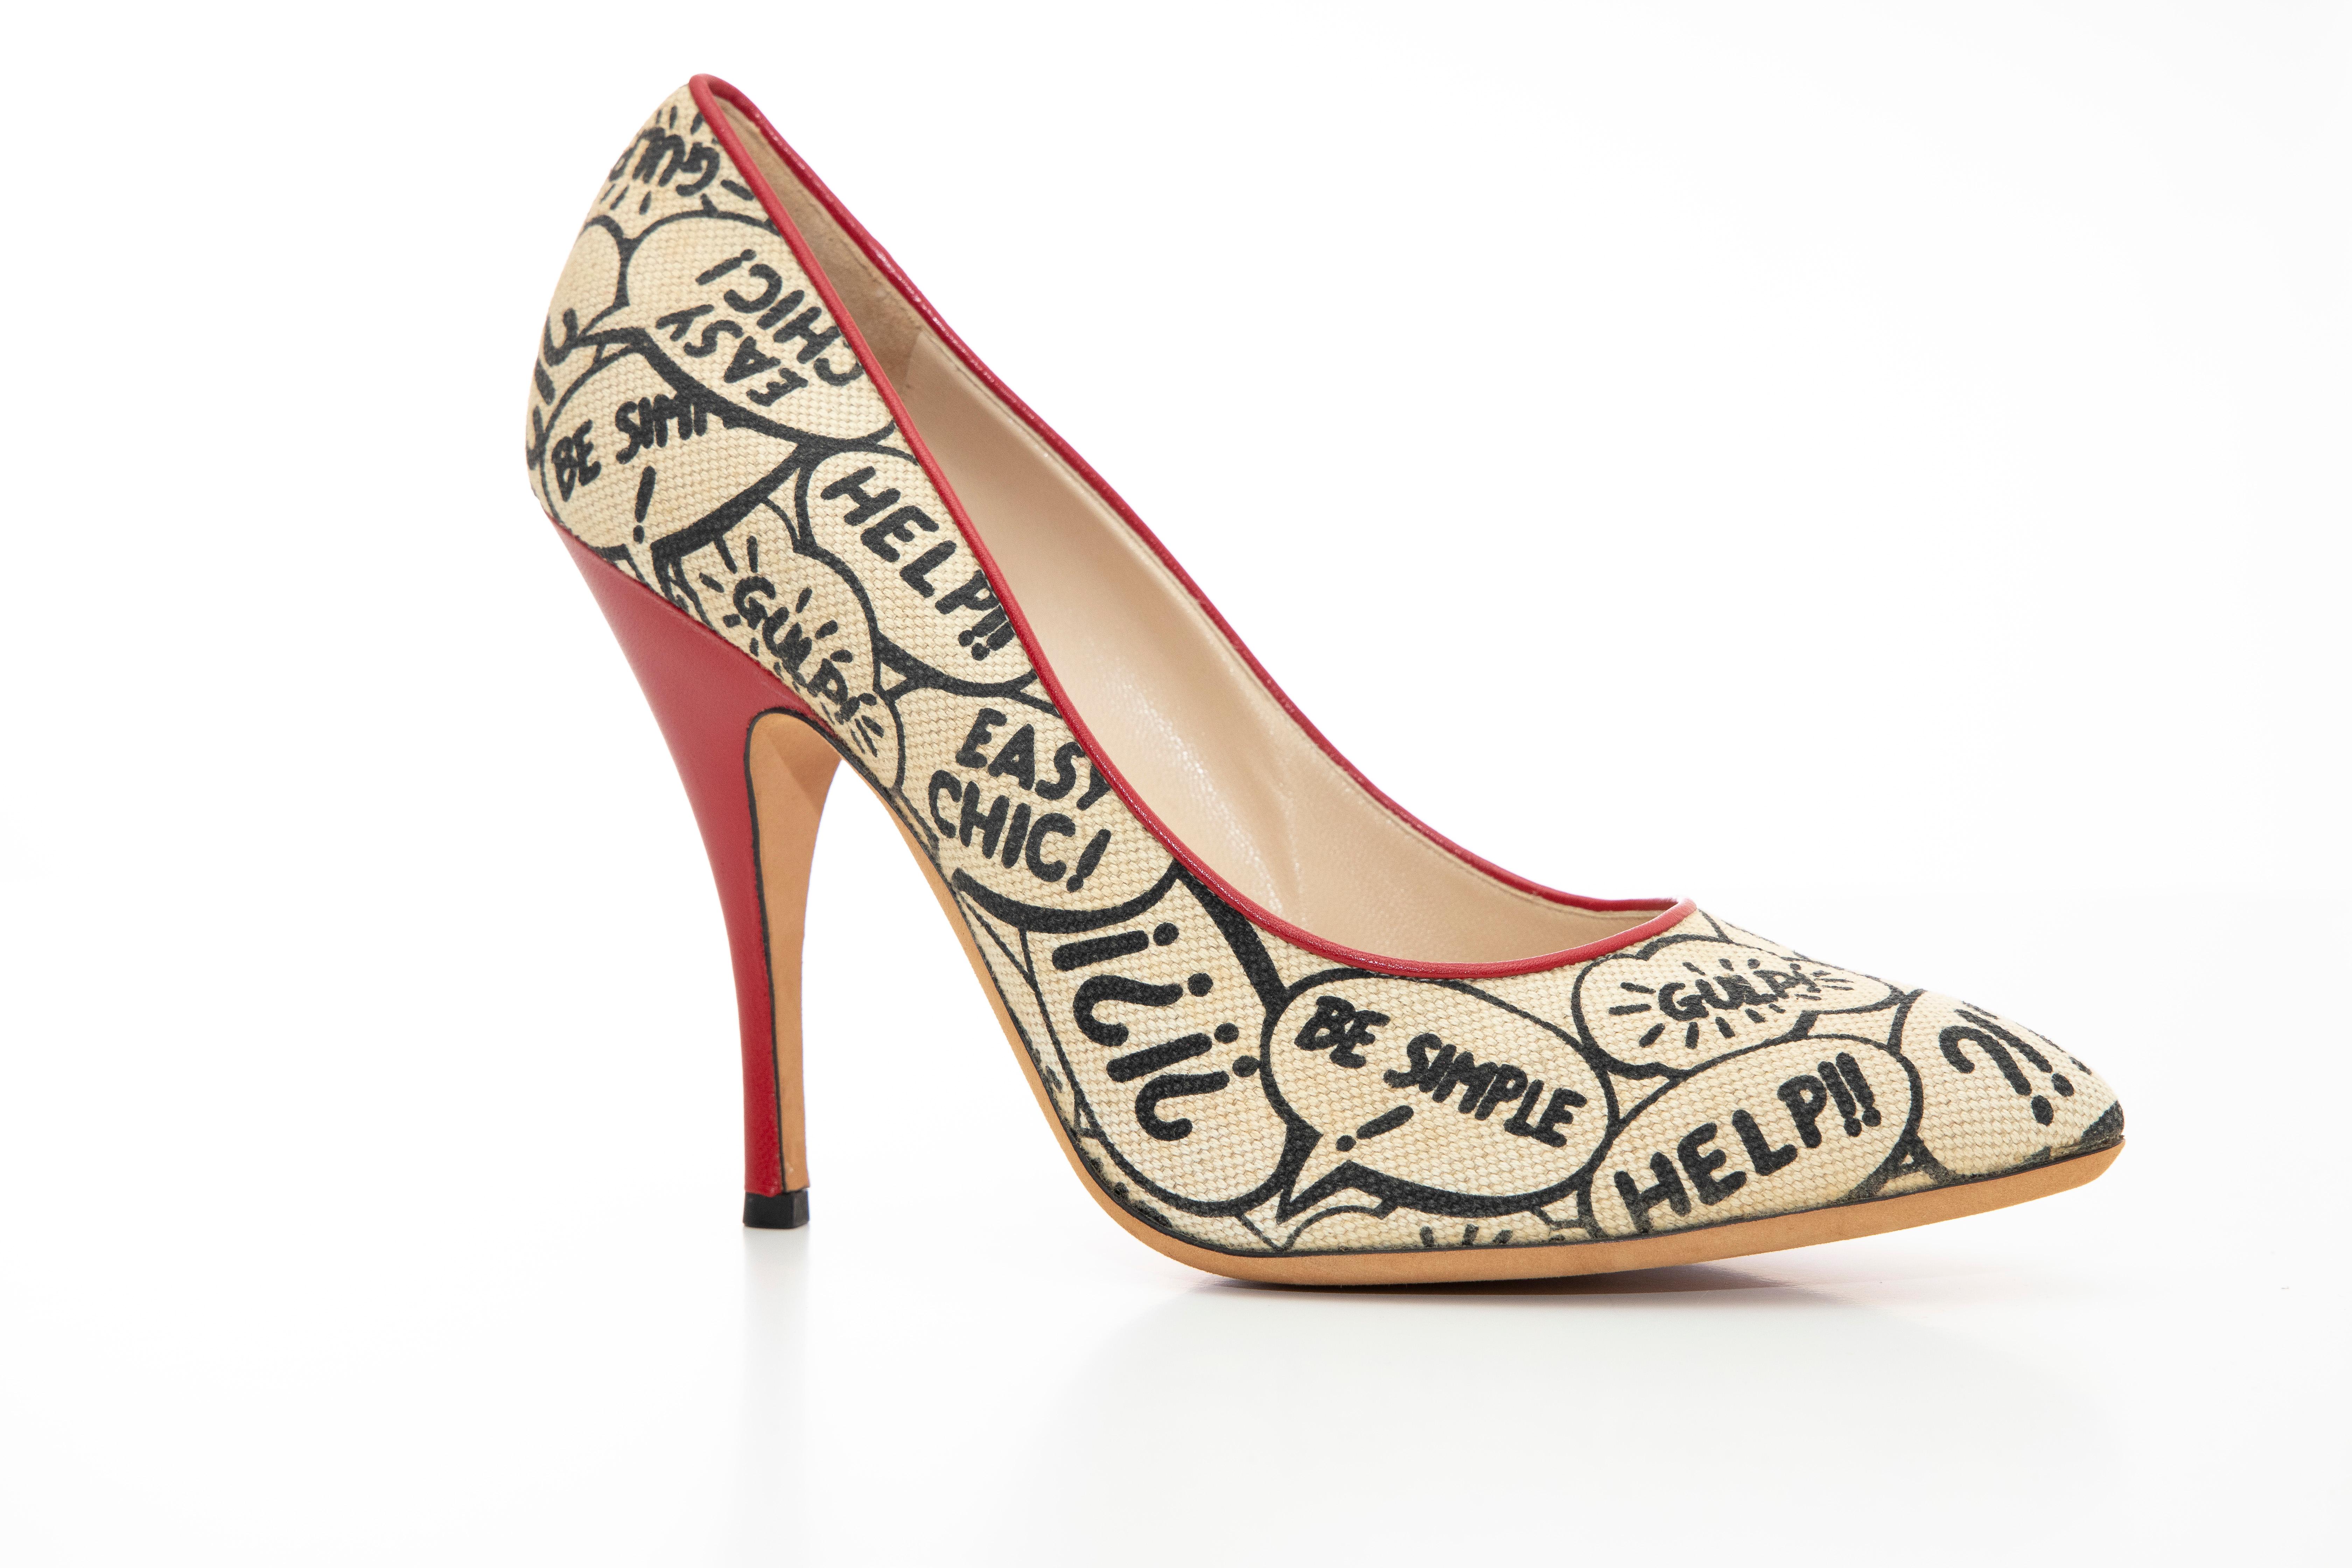 Moschino, Circa: 1993  printed stiletto with red leather heels and trim.

EU. 41
US. 11

Heel: 4.5